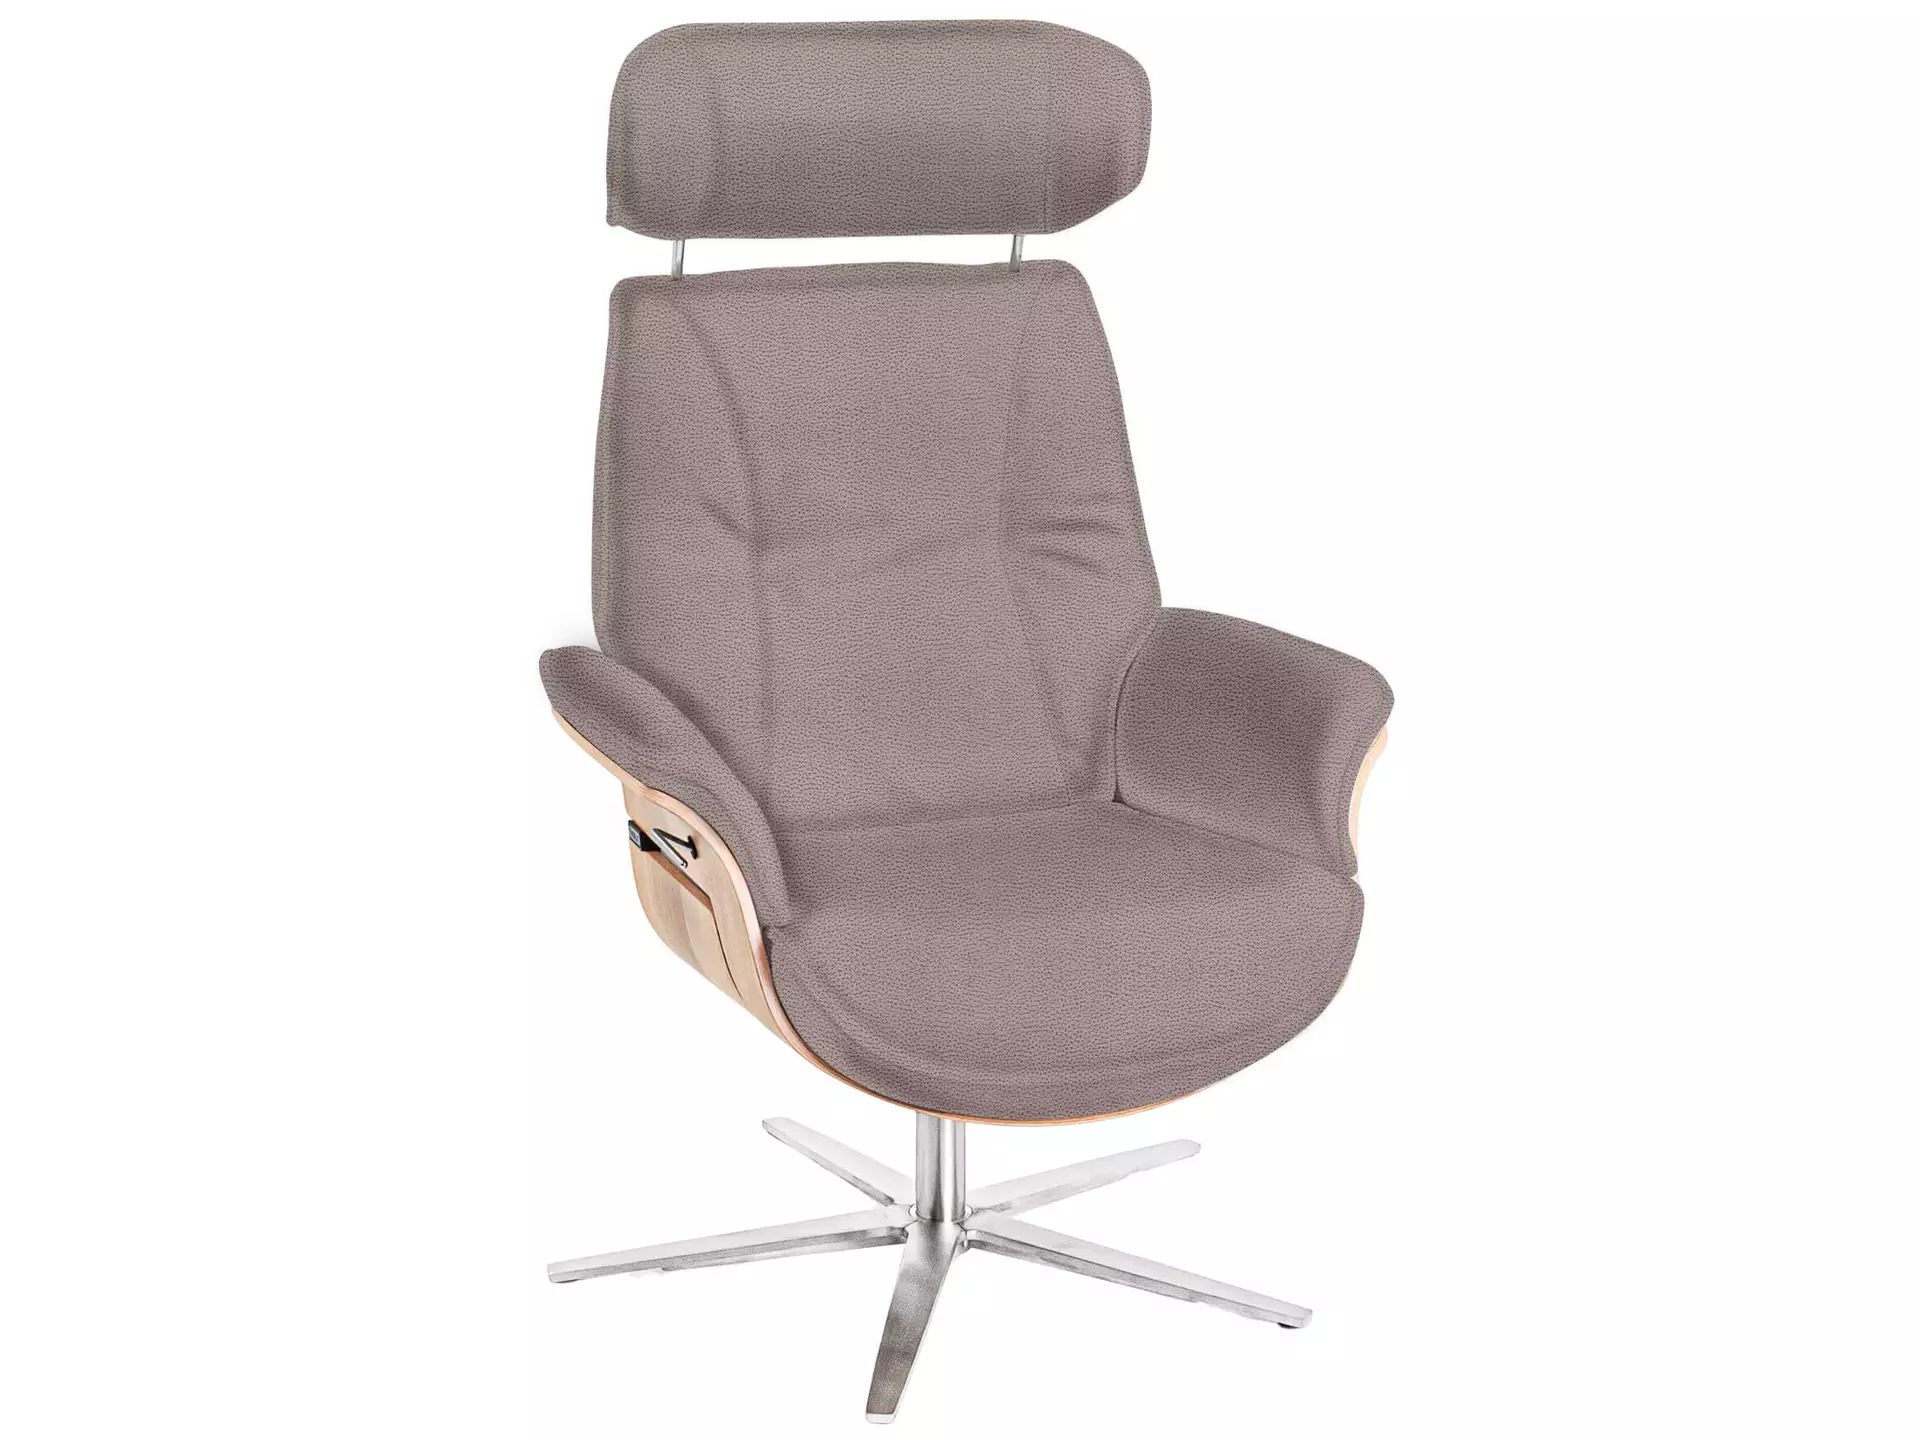 Relaxer Curacao Wildeiche Basic Polipol / Farbe: Alu / Material: Stoff Basic